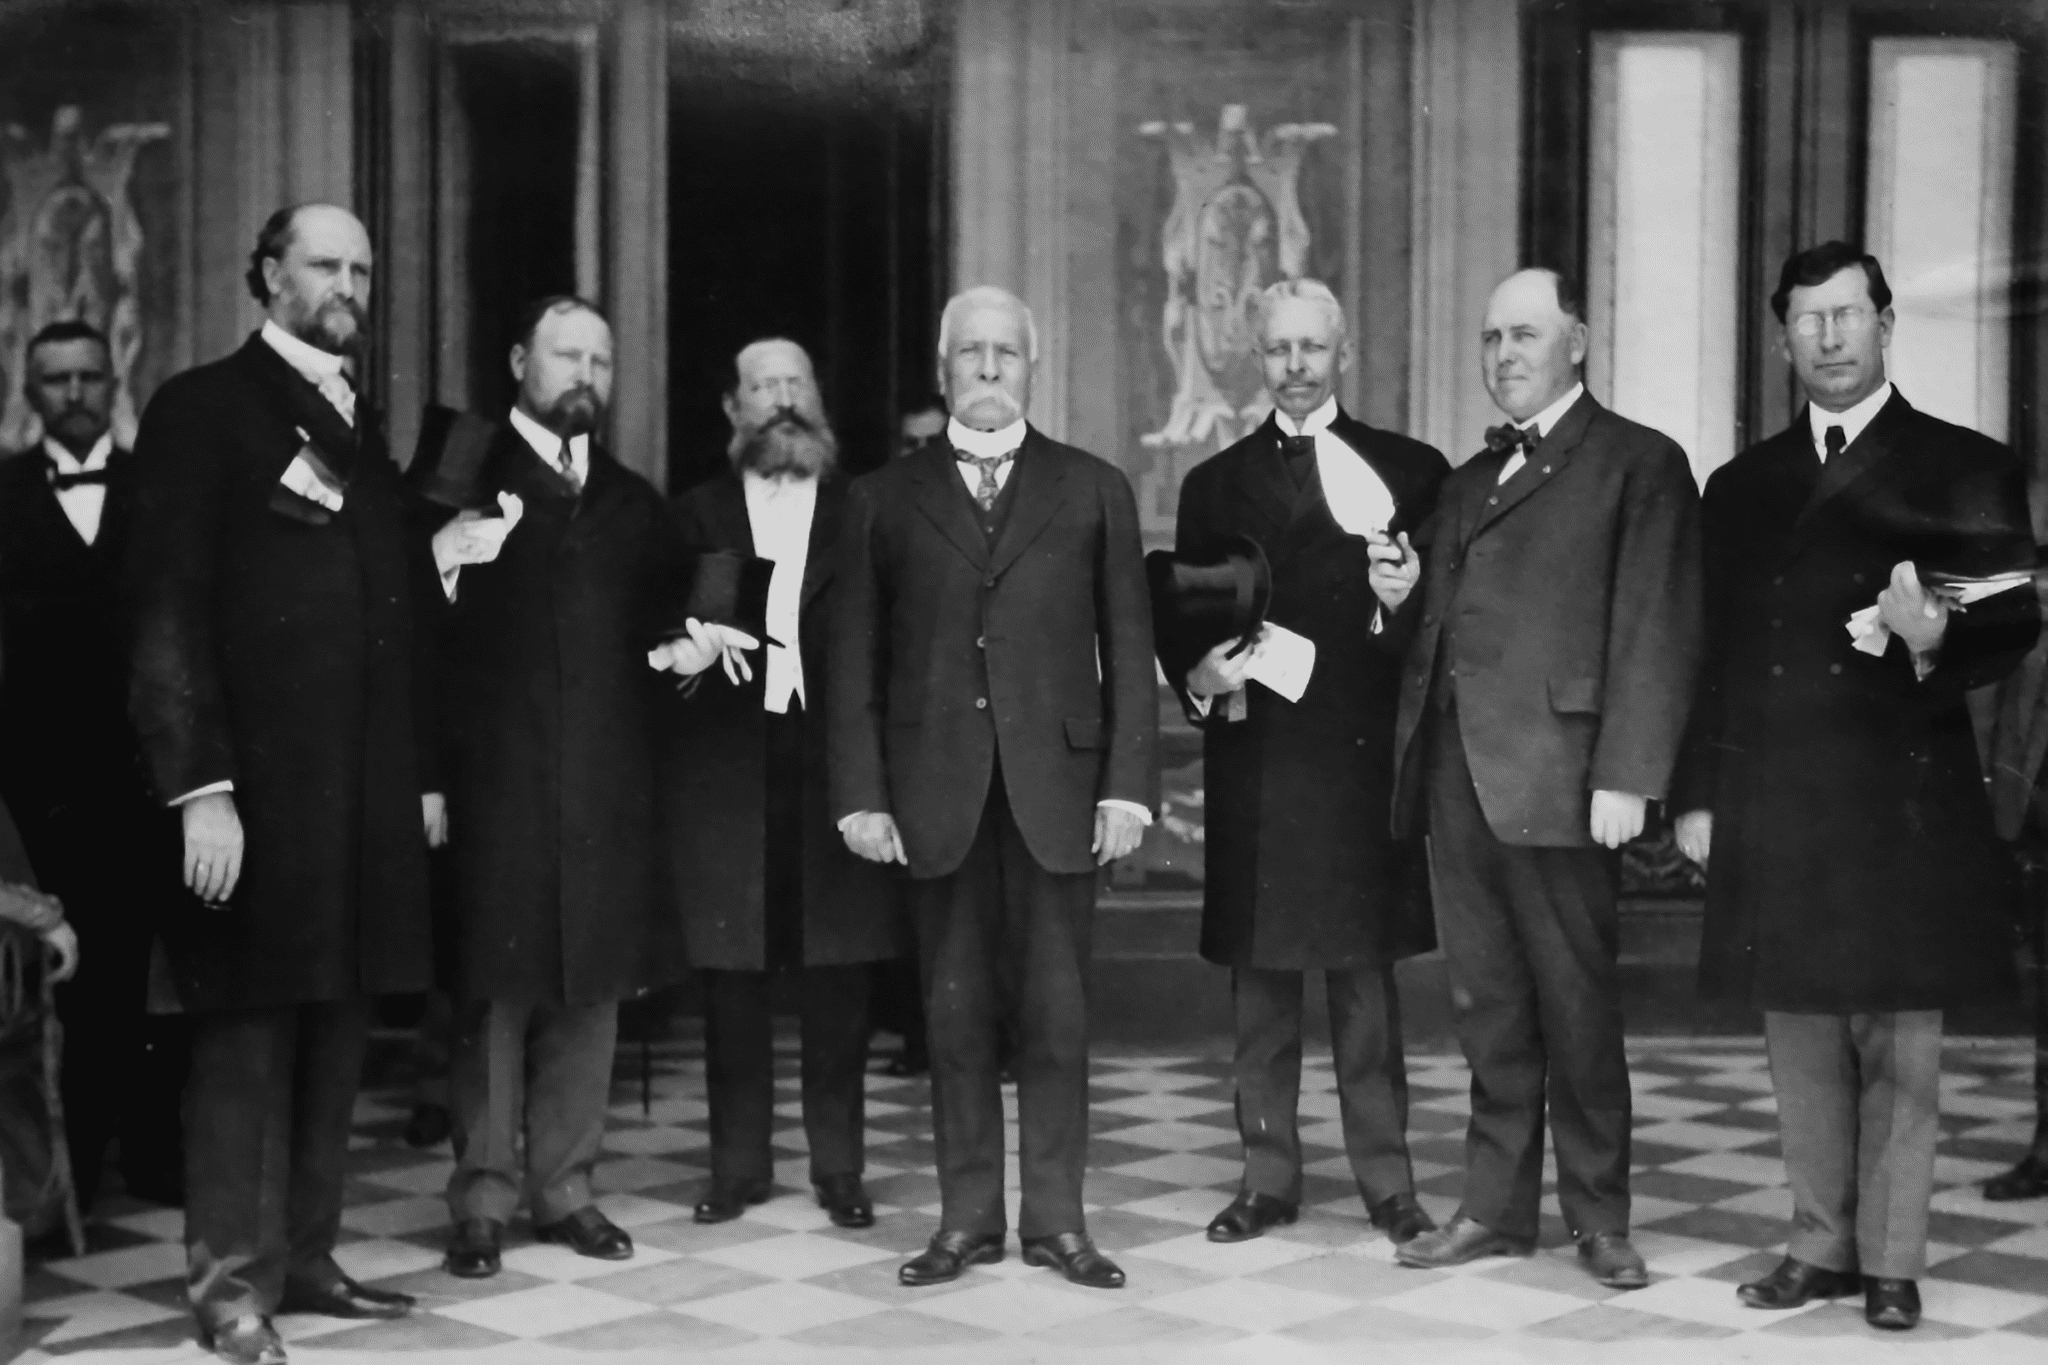 California Masonic delegation poses with Gen. Porfirio Diaz, president of Mexico, in Mexico City. The group and President Diaz inspect the traveling Masonic trowel brought from Los Angeles to Mexico in 1909.